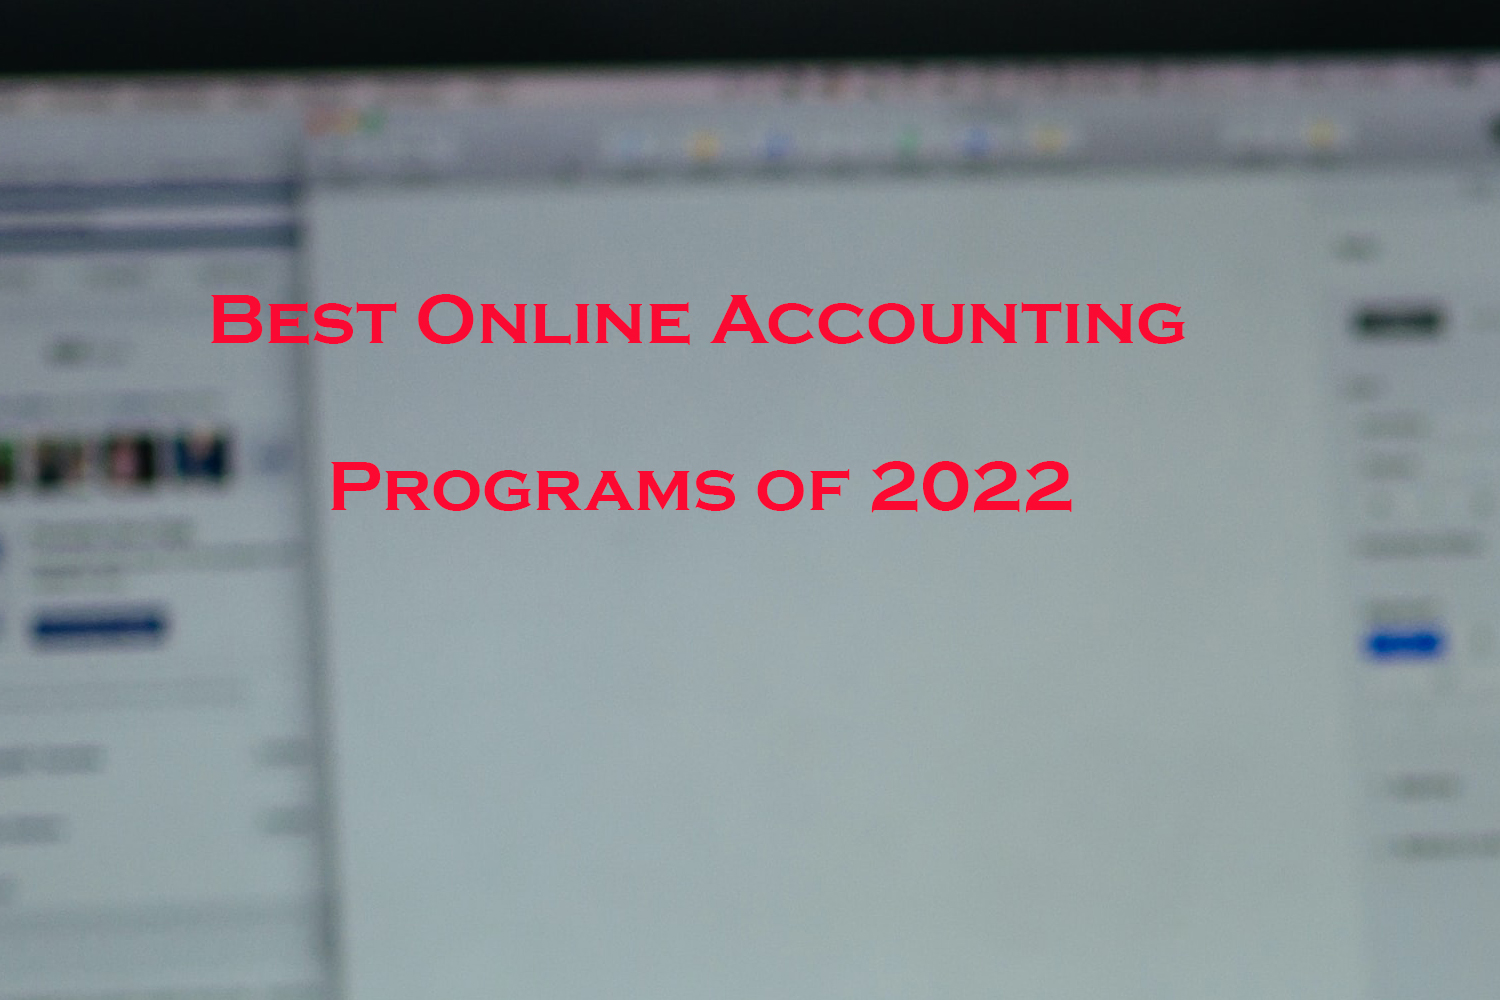 Best Online Accounting Programs of 2022